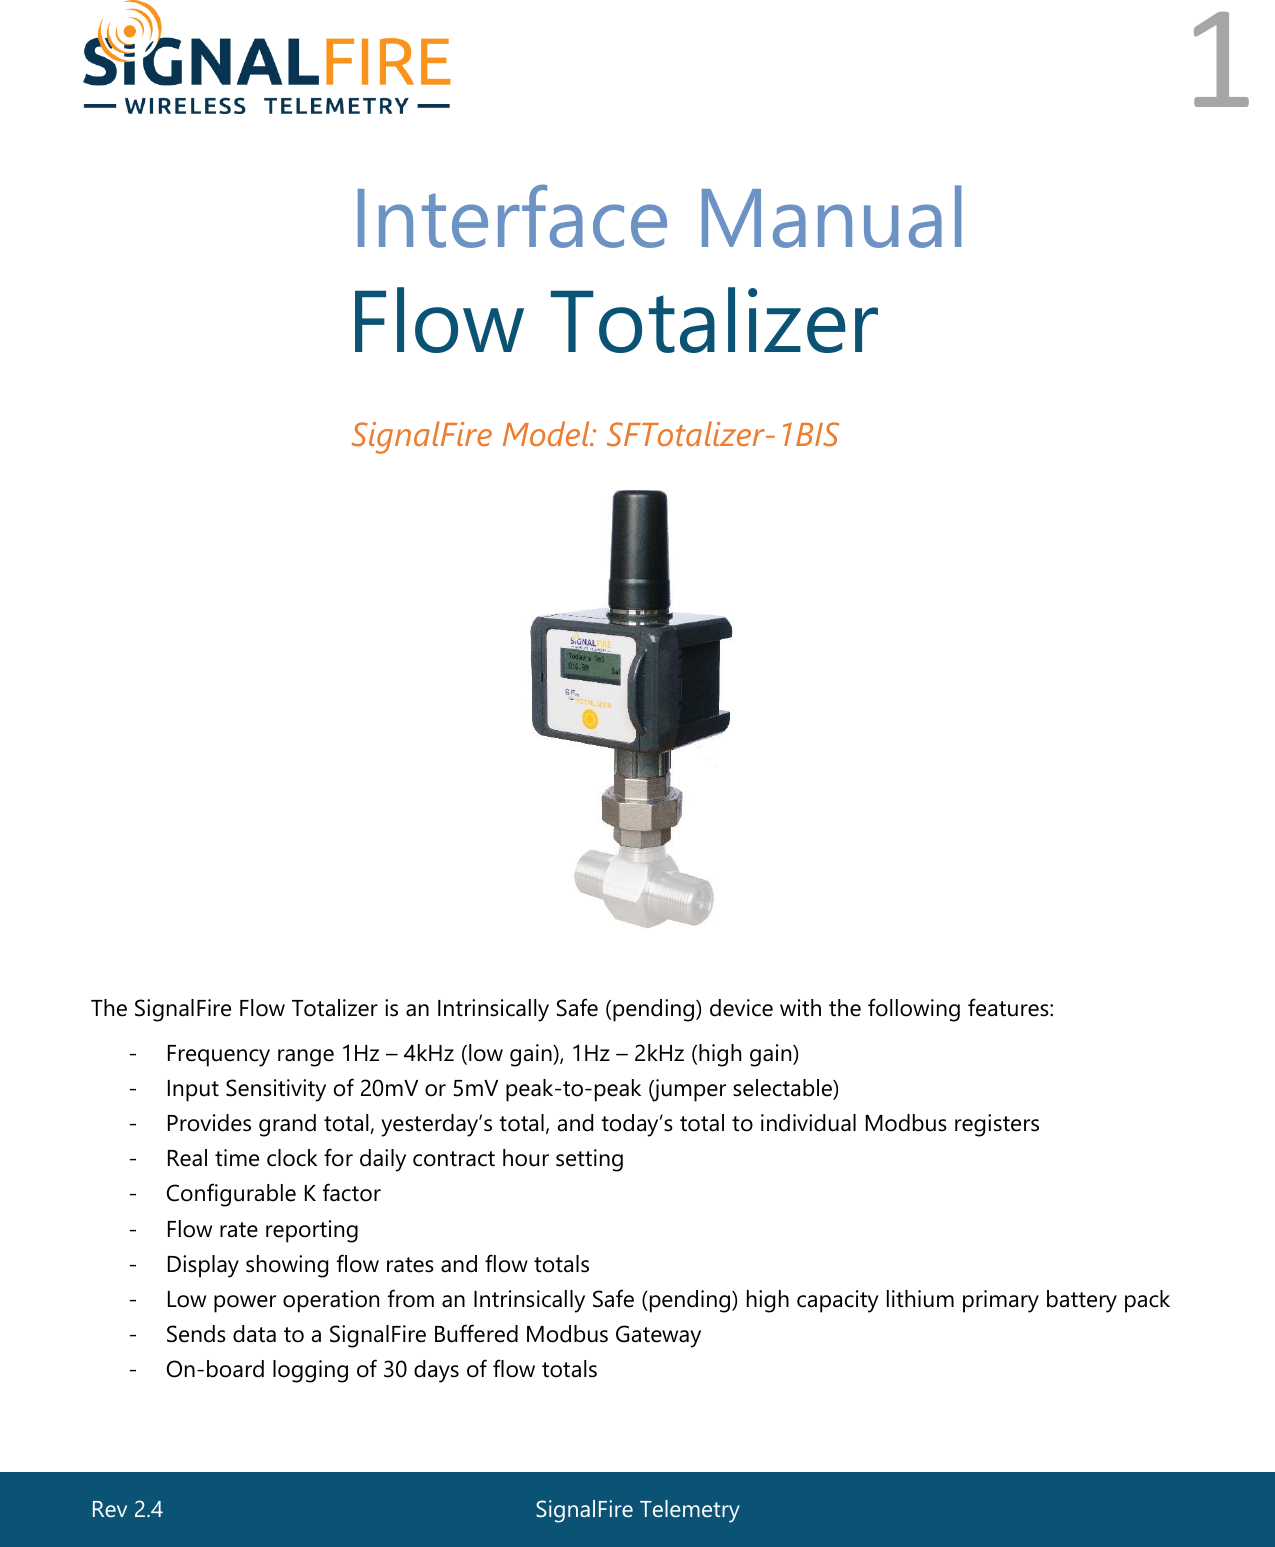  1       Interface Manual  Flow Totalizer  SignalFire Model: SFTotalizer-1BIS  The SignalFire Flow Totalizer is an Intrinsically Safe (pending) device with the following features: - Frequency range 1Hz – 4kHz (low gain), 1Hz – 2kHz (high gain) - Input Sensitivity of 20mV or 5mV peak-to-peak (jumper selectable)  - Provides grand total, yesterday’s total, and today’s total to individual Modbus registers - Real time clock for daily contract hour setting - Configurable K factor - Flow rate reporting  - Display showing flow rates and flow totals  - Low power operation from an Intrinsically Safe (pending) high capacity lithium primary battery pack - Sends data to a SignalFire Buffered Modbus Gateway - On-board logging of 30 days of flow totals  SignalFire Telemetry Rev 2.4 